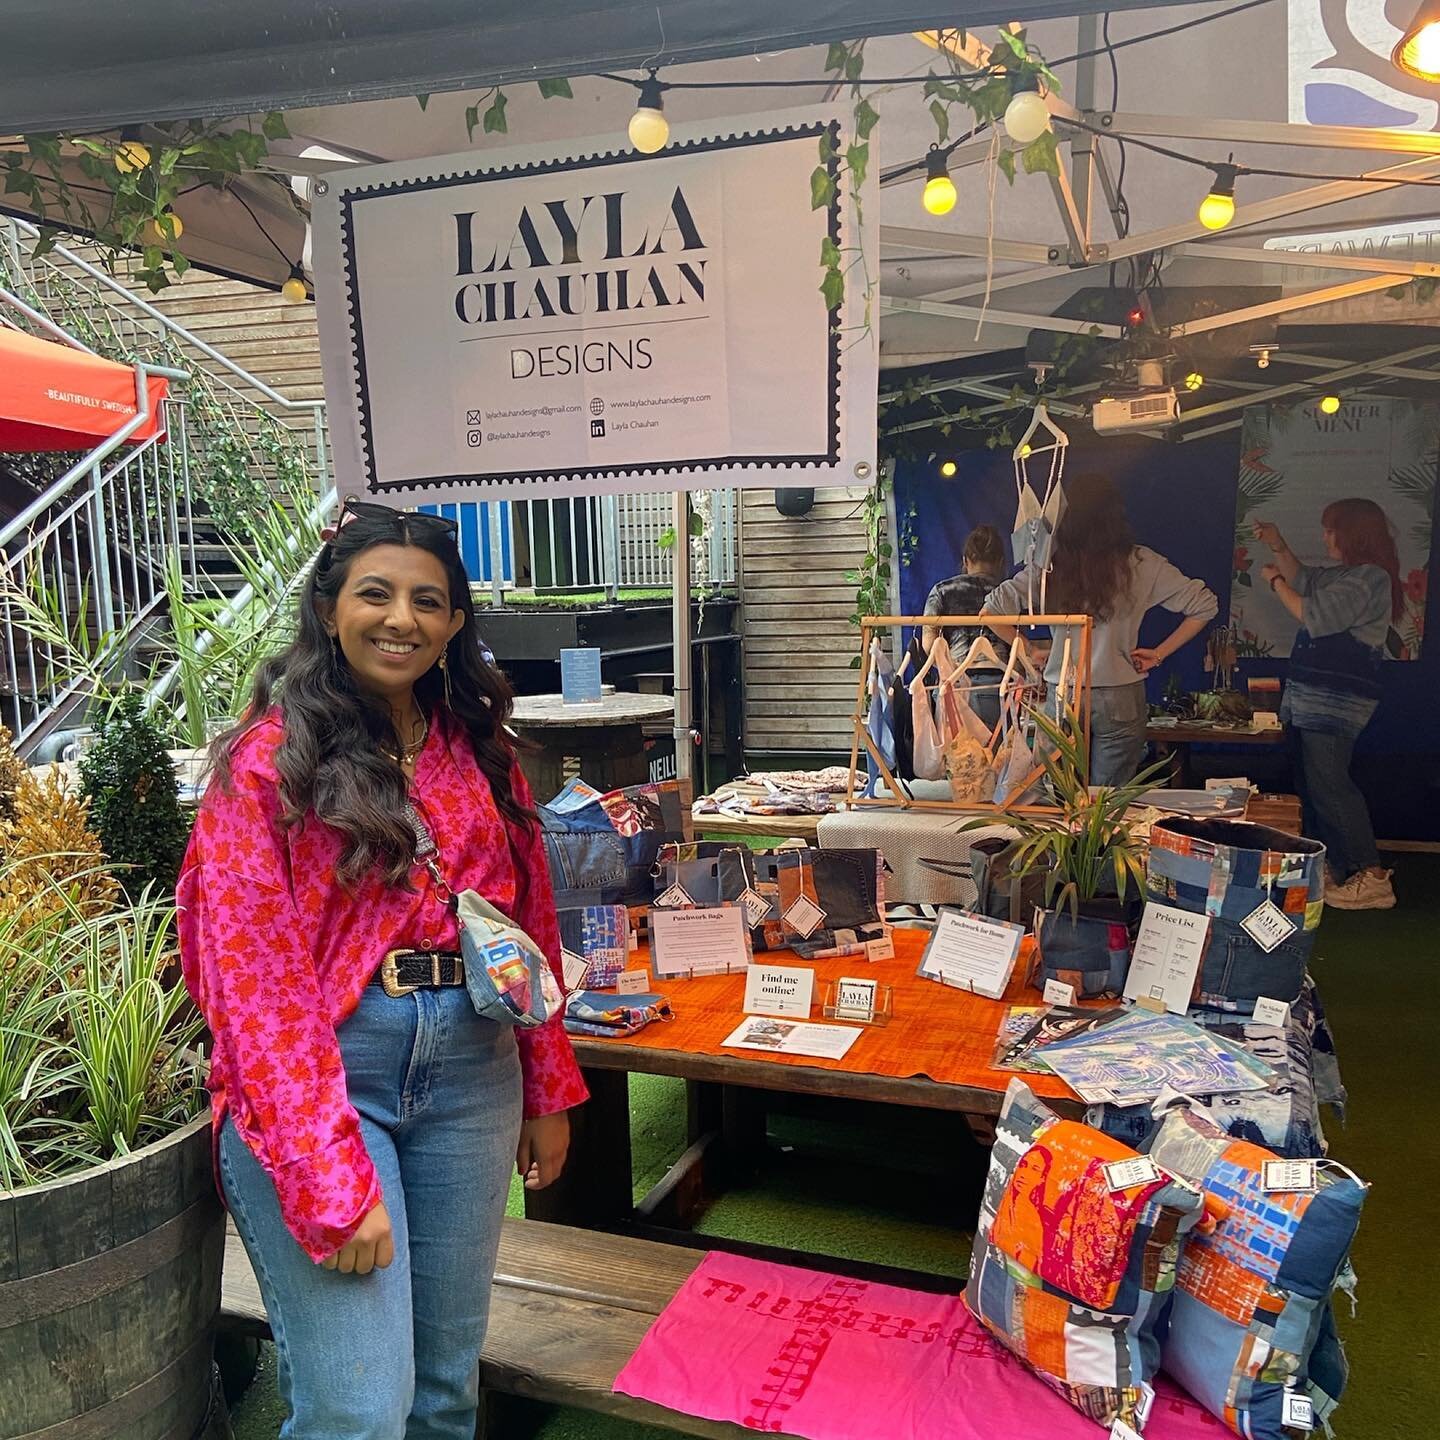 MARKETS, MULLETS AND MUSIC.

Wow - what a weekend! This weekend I had the pleasure of being involved with Markets, Mullets and Music, a great event by @the.edinburgh.collective and my first market to date! It was so great to meet other creatives as w